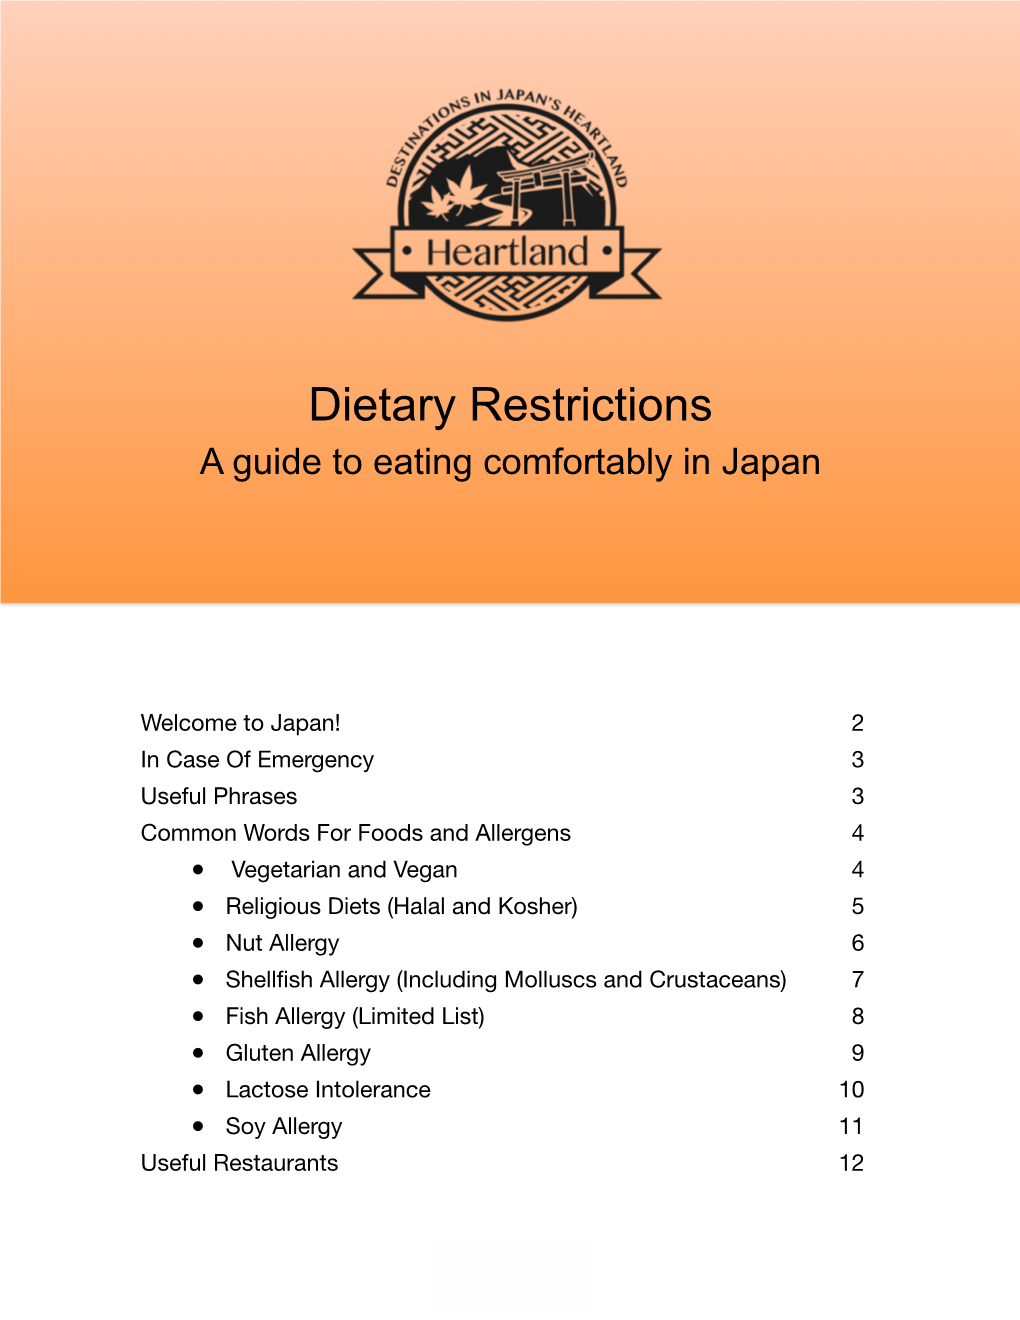 Dietary Restrictions a Guide to Eating Comfortably in Japan